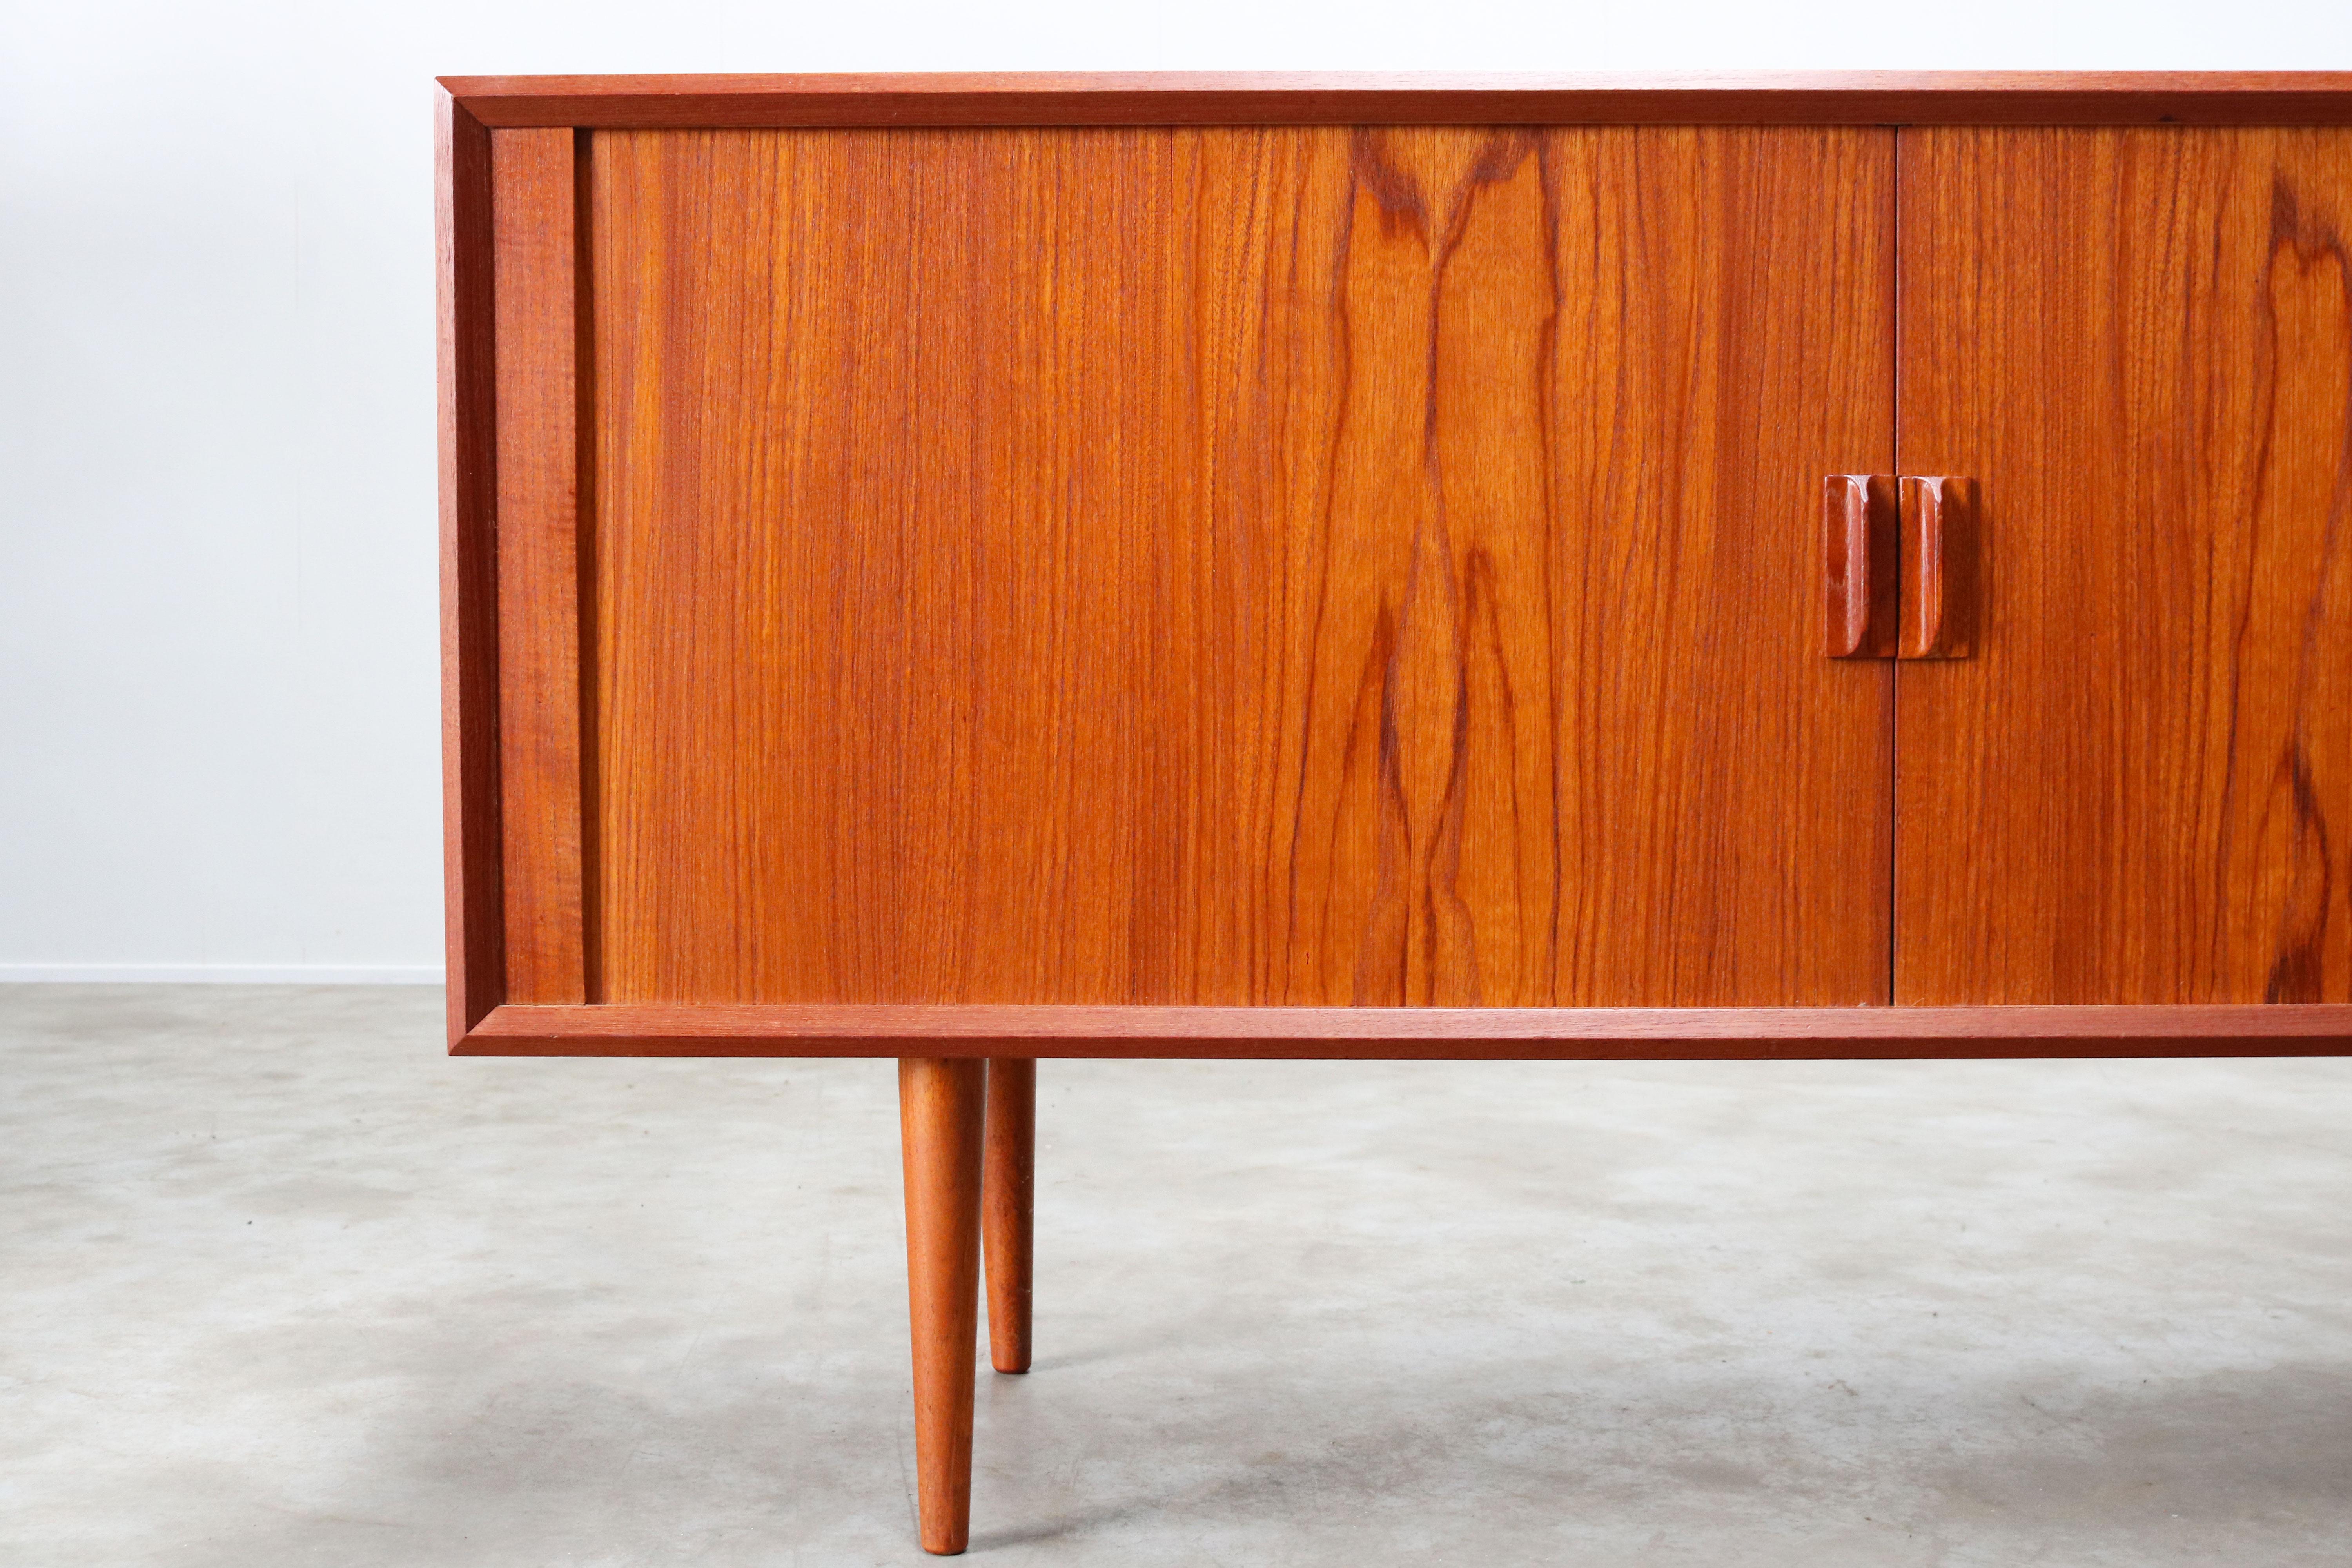 Rare small Danish design sideboard / credenza by Svend Aage Madsen for the Faarup Mobelfabrik in the 1950s. The sideboard has a amazing clean design and small size. The tambour doors disappear completely when opened and the craftsmanship on this